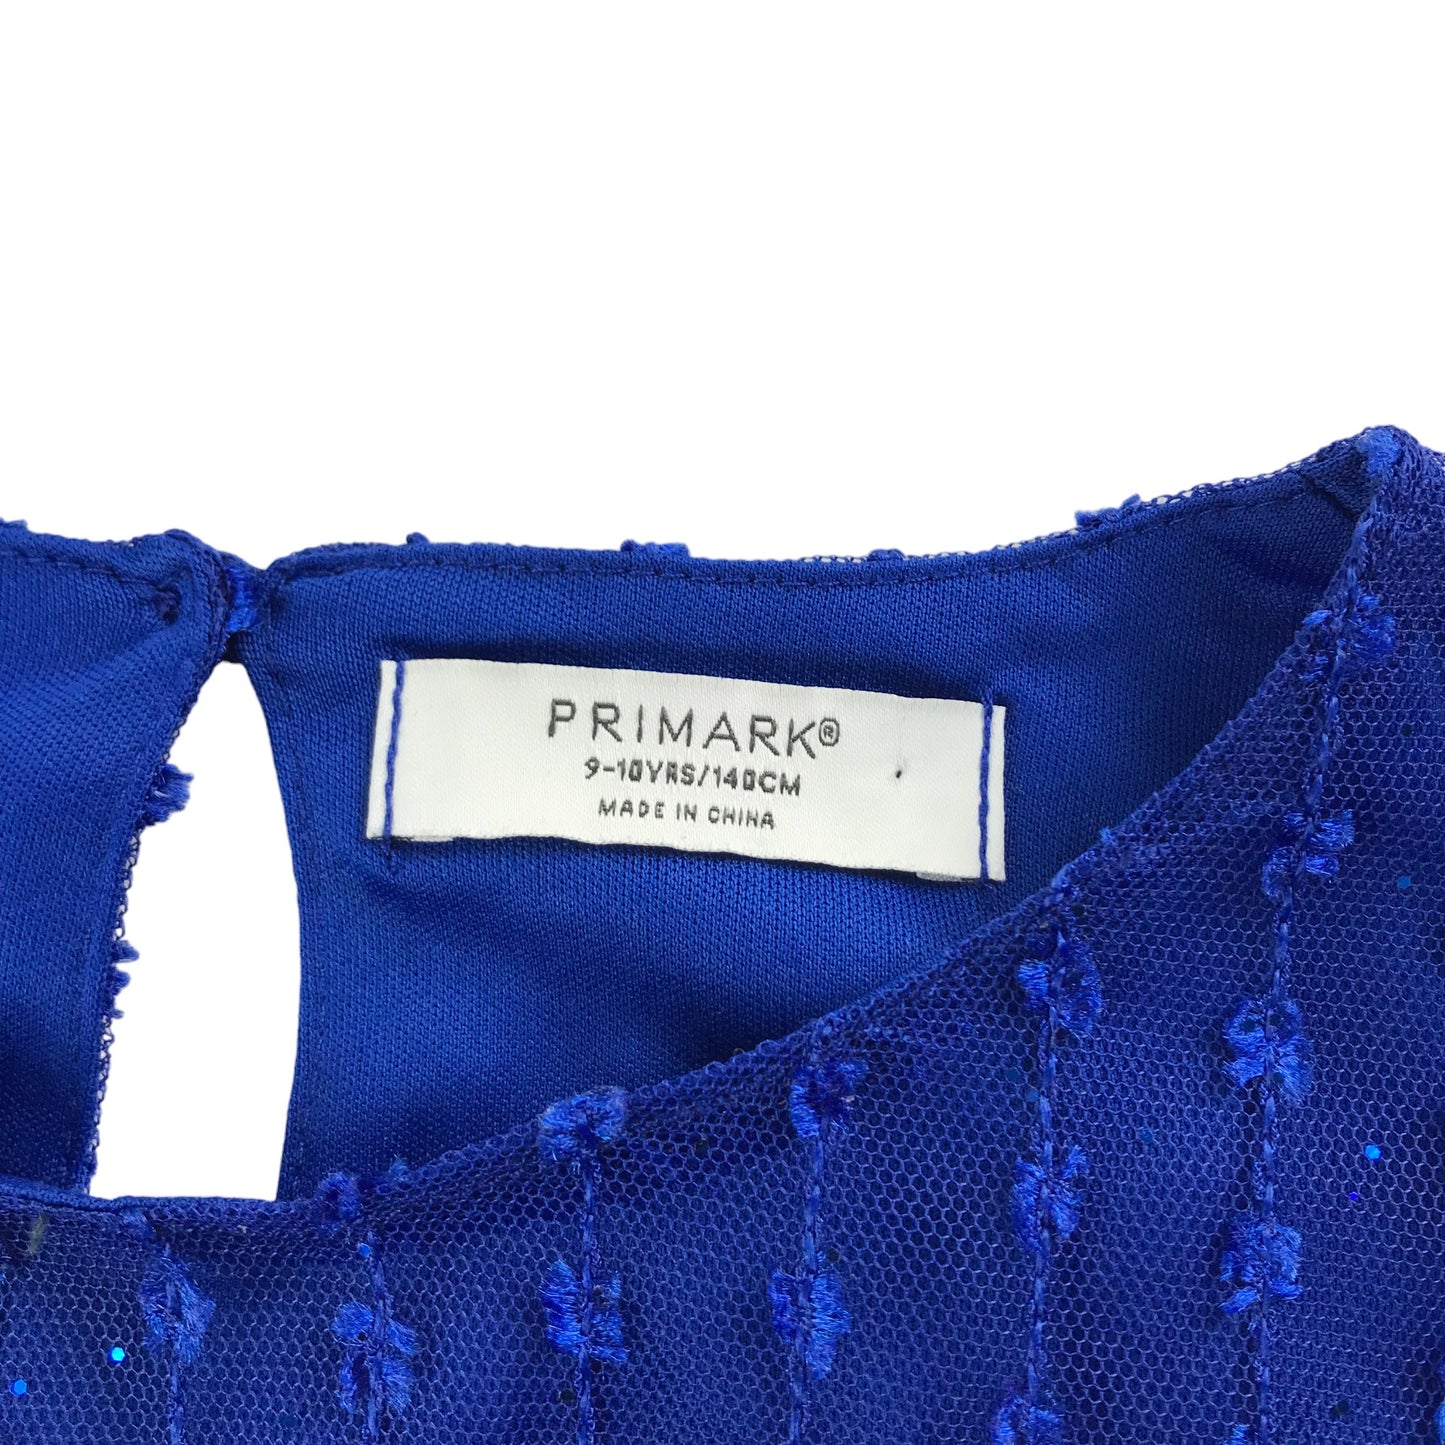 Primark Dress Age 9 Electric Blue A-line Short Butterfly Sleeve